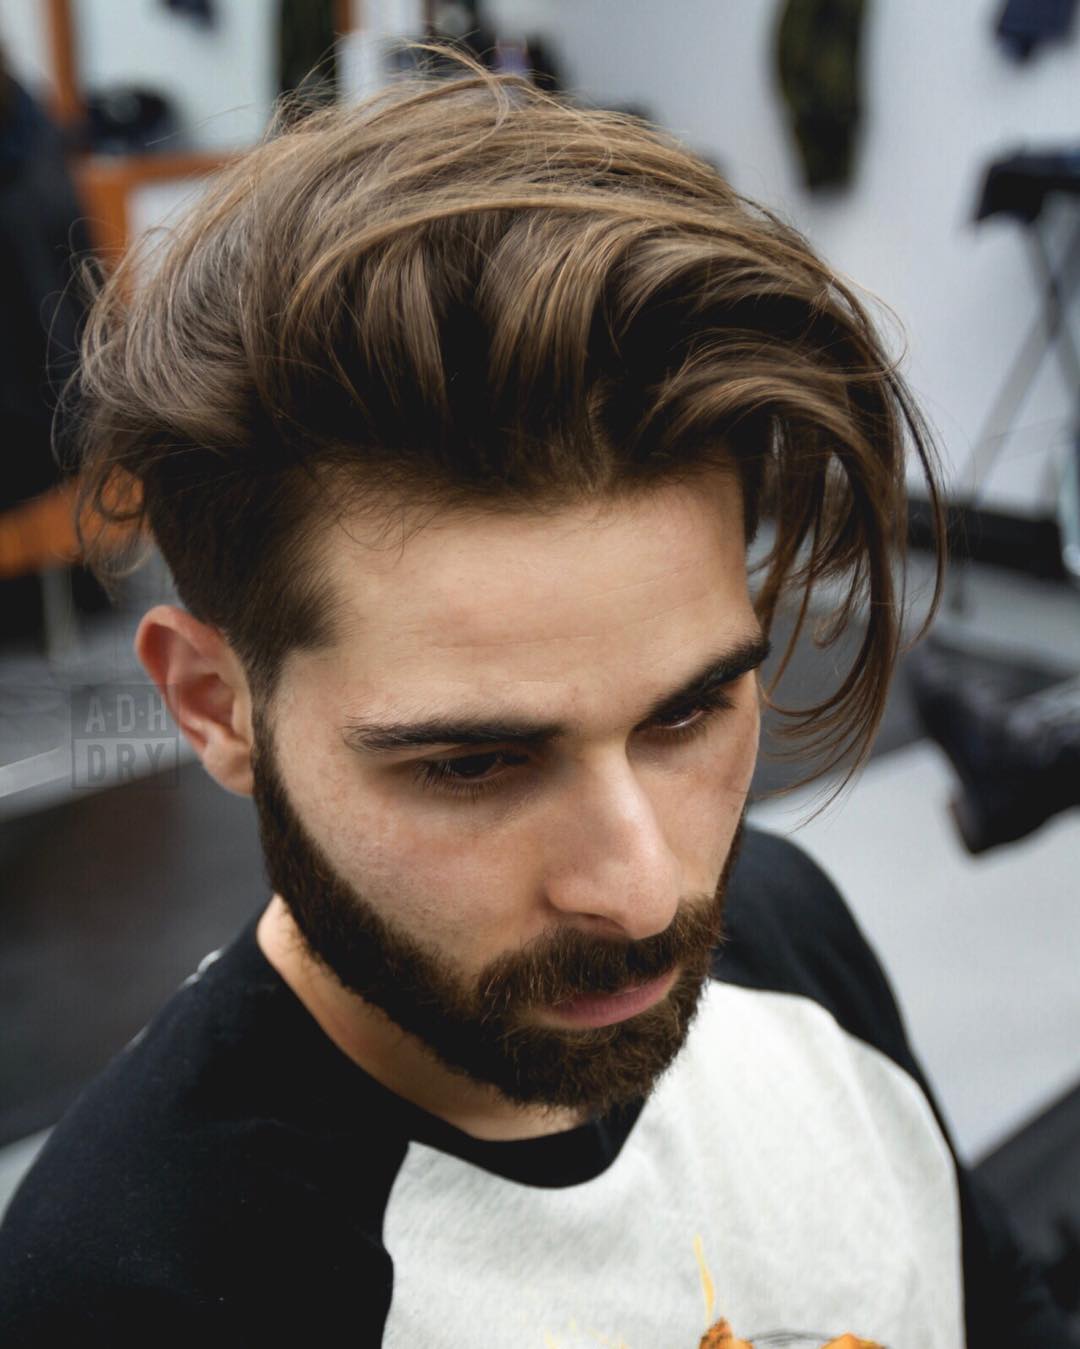 Hair Care for Men: How To Keep Your Scalp & Hair Healthy